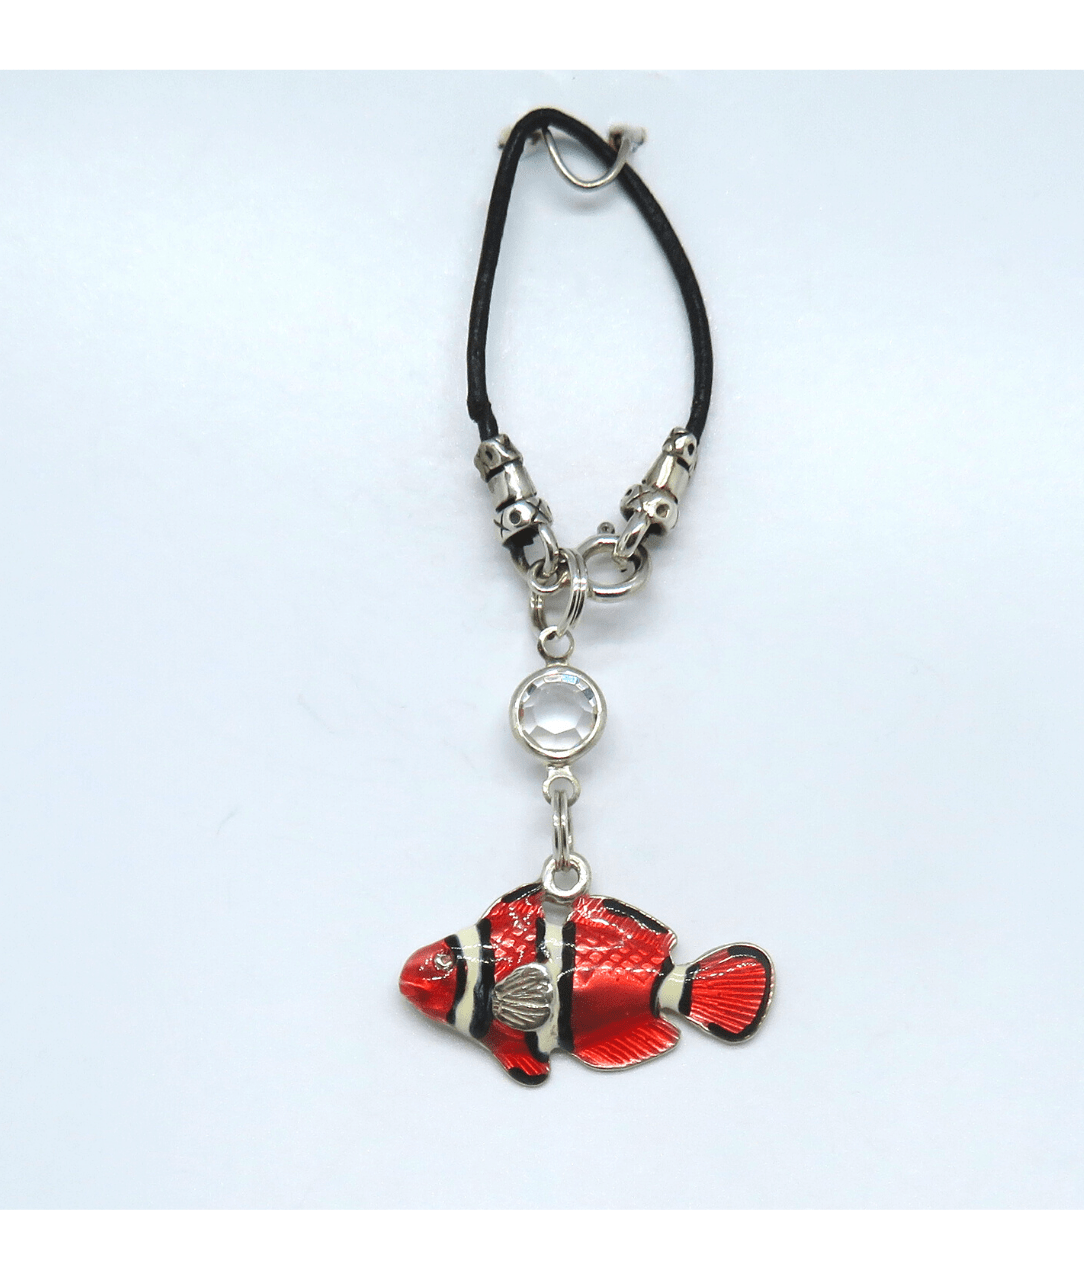 Clownfish Hand-enameled with Crystal Removable Sterling Charm on Leather KooLoop 2 1/2", Charm is 1 1/4"